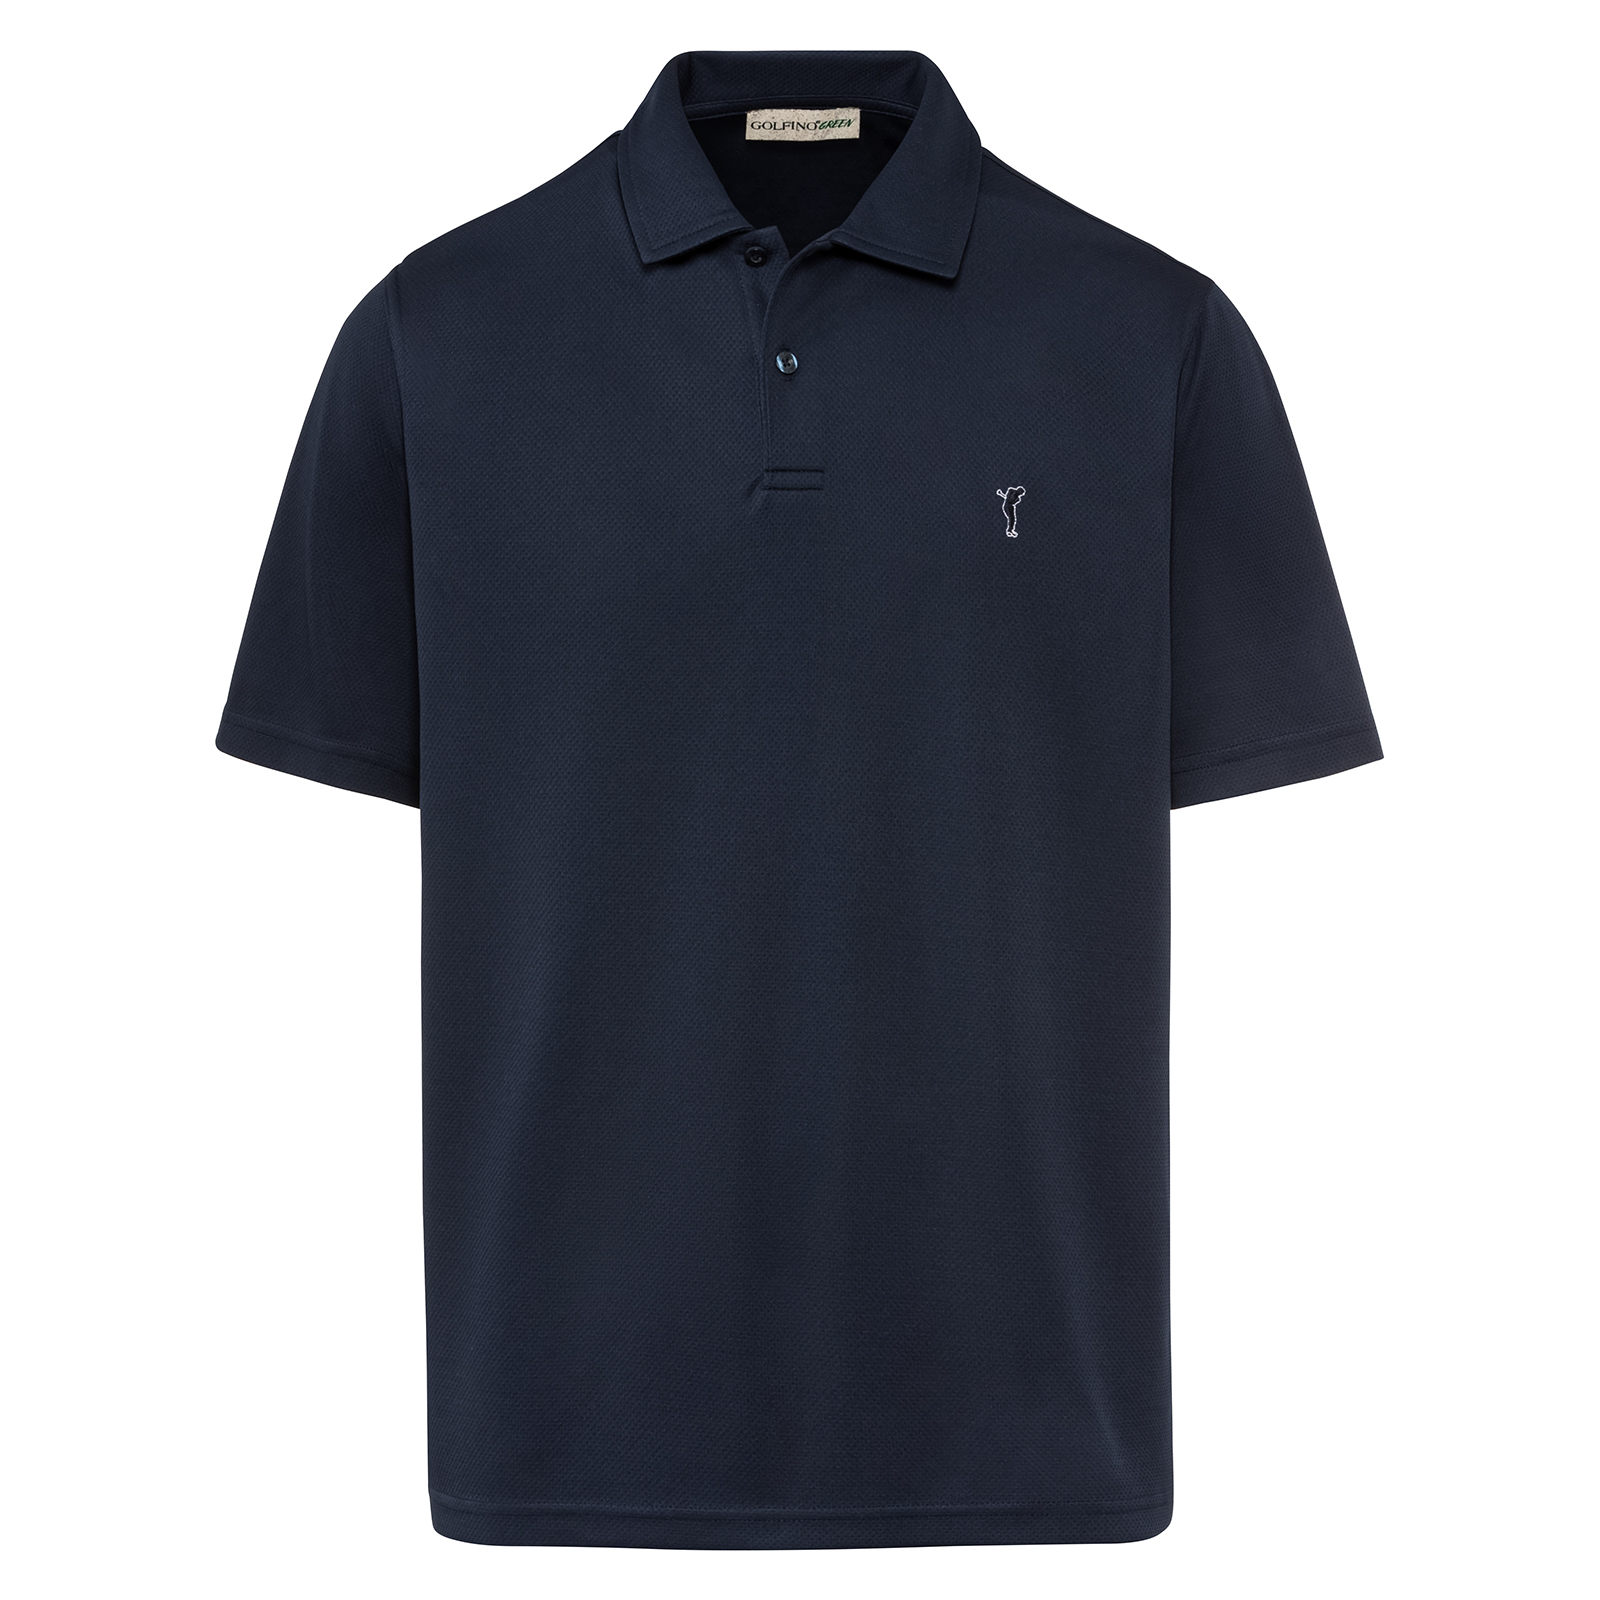 Men's golf shirt containing sustainable Kafetex® functional fibre 